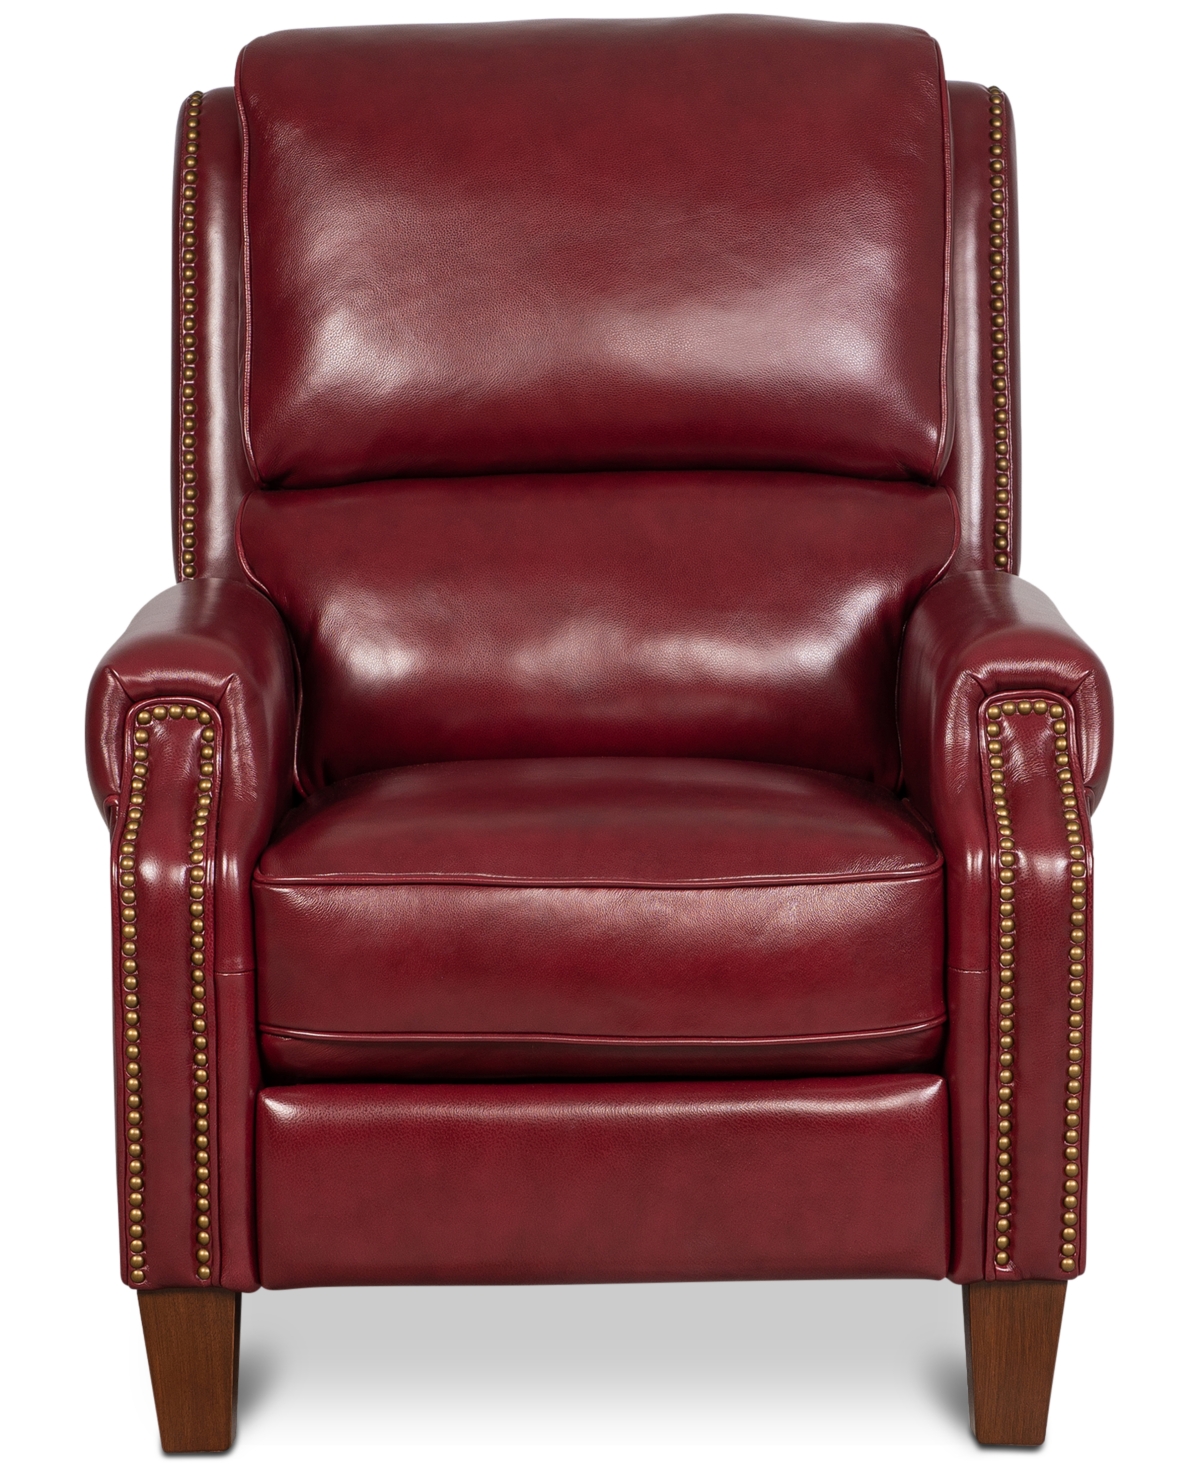 10751729 Arianlee Leather Push Back Recliner, Created for M sku 10751729